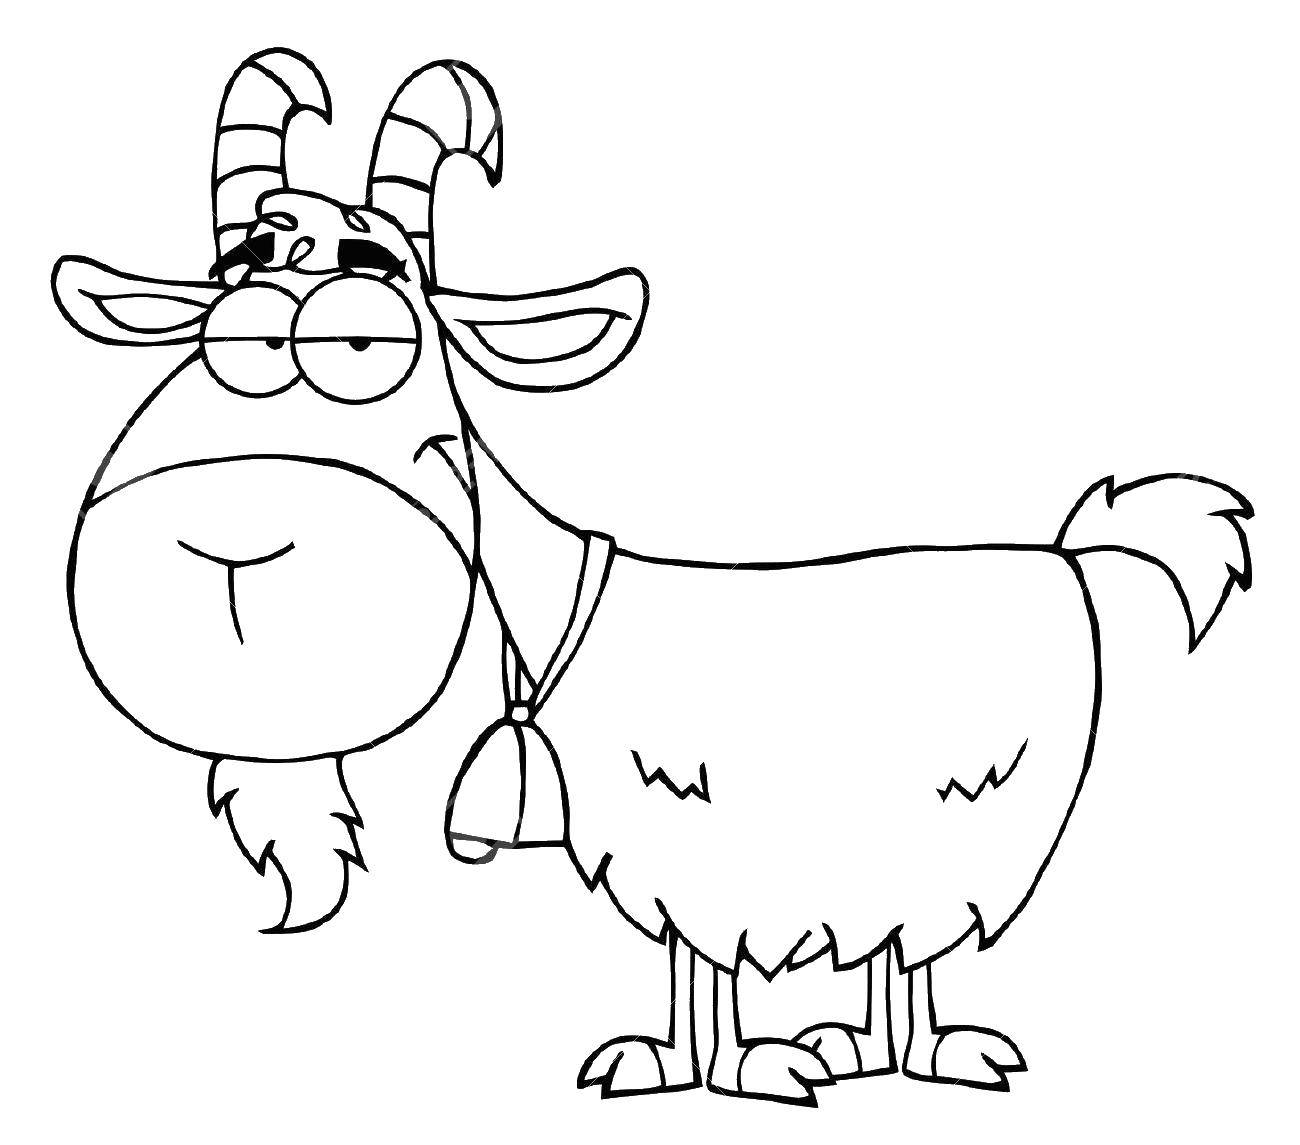 Coloring Goat with a bell. Category The contours of the cartoons. Tags:  the goat.